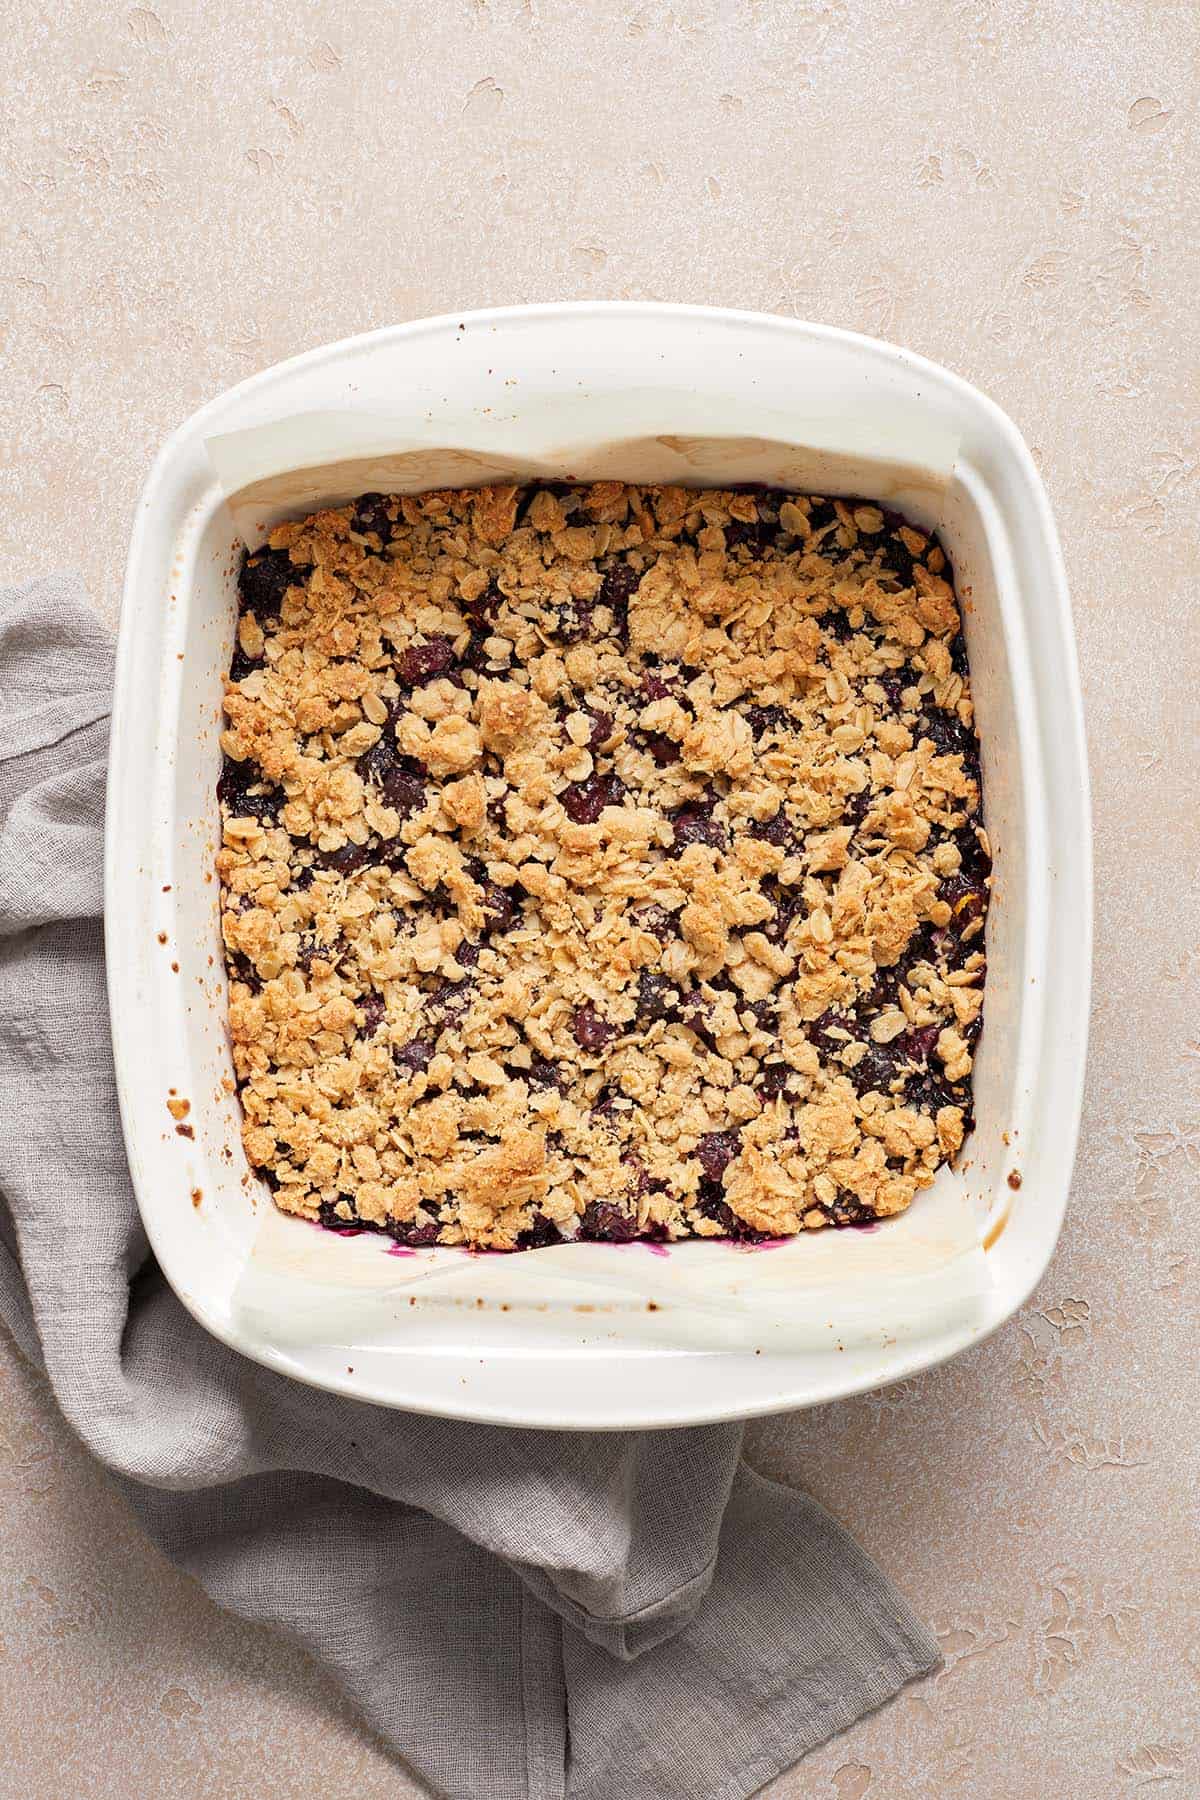 Square white baking dish filled with golden blueberry oatmeal mixture that was freshly baked